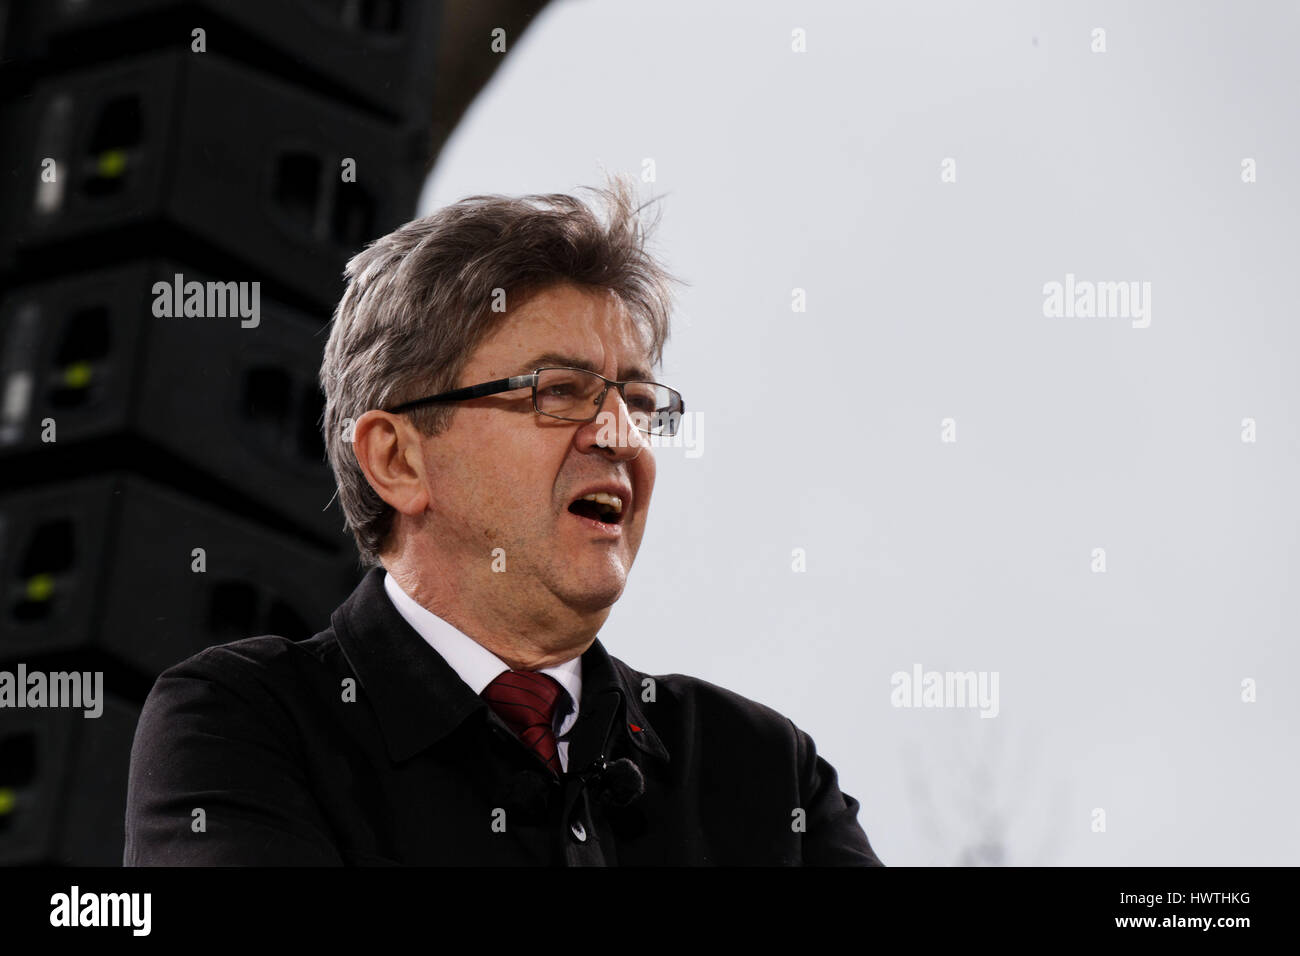 Paris, France. 18th March, 2017. Speech by Jean-Luc Melenchon, Presidential Candidate  for the 6 th Republic in Paris, France. Stock Photo